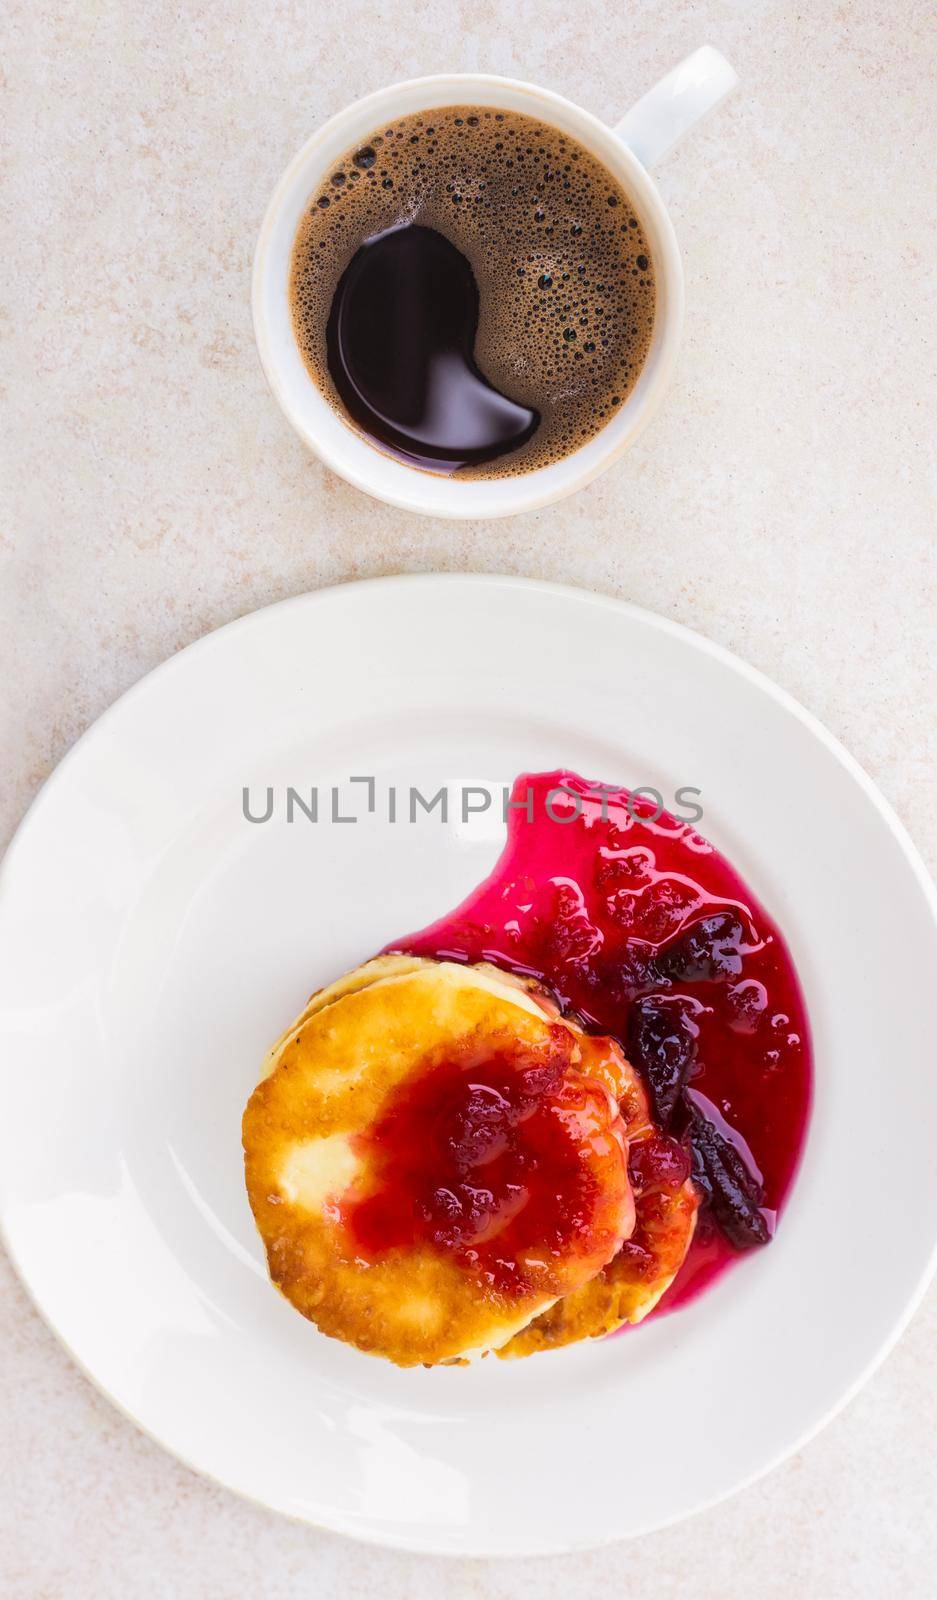 Fresh cheese cakes with plum jam and a mug with freshly brewed coffee on a light table surface, top view. Wake up in the morning, start a new day. Hearty breakfast.